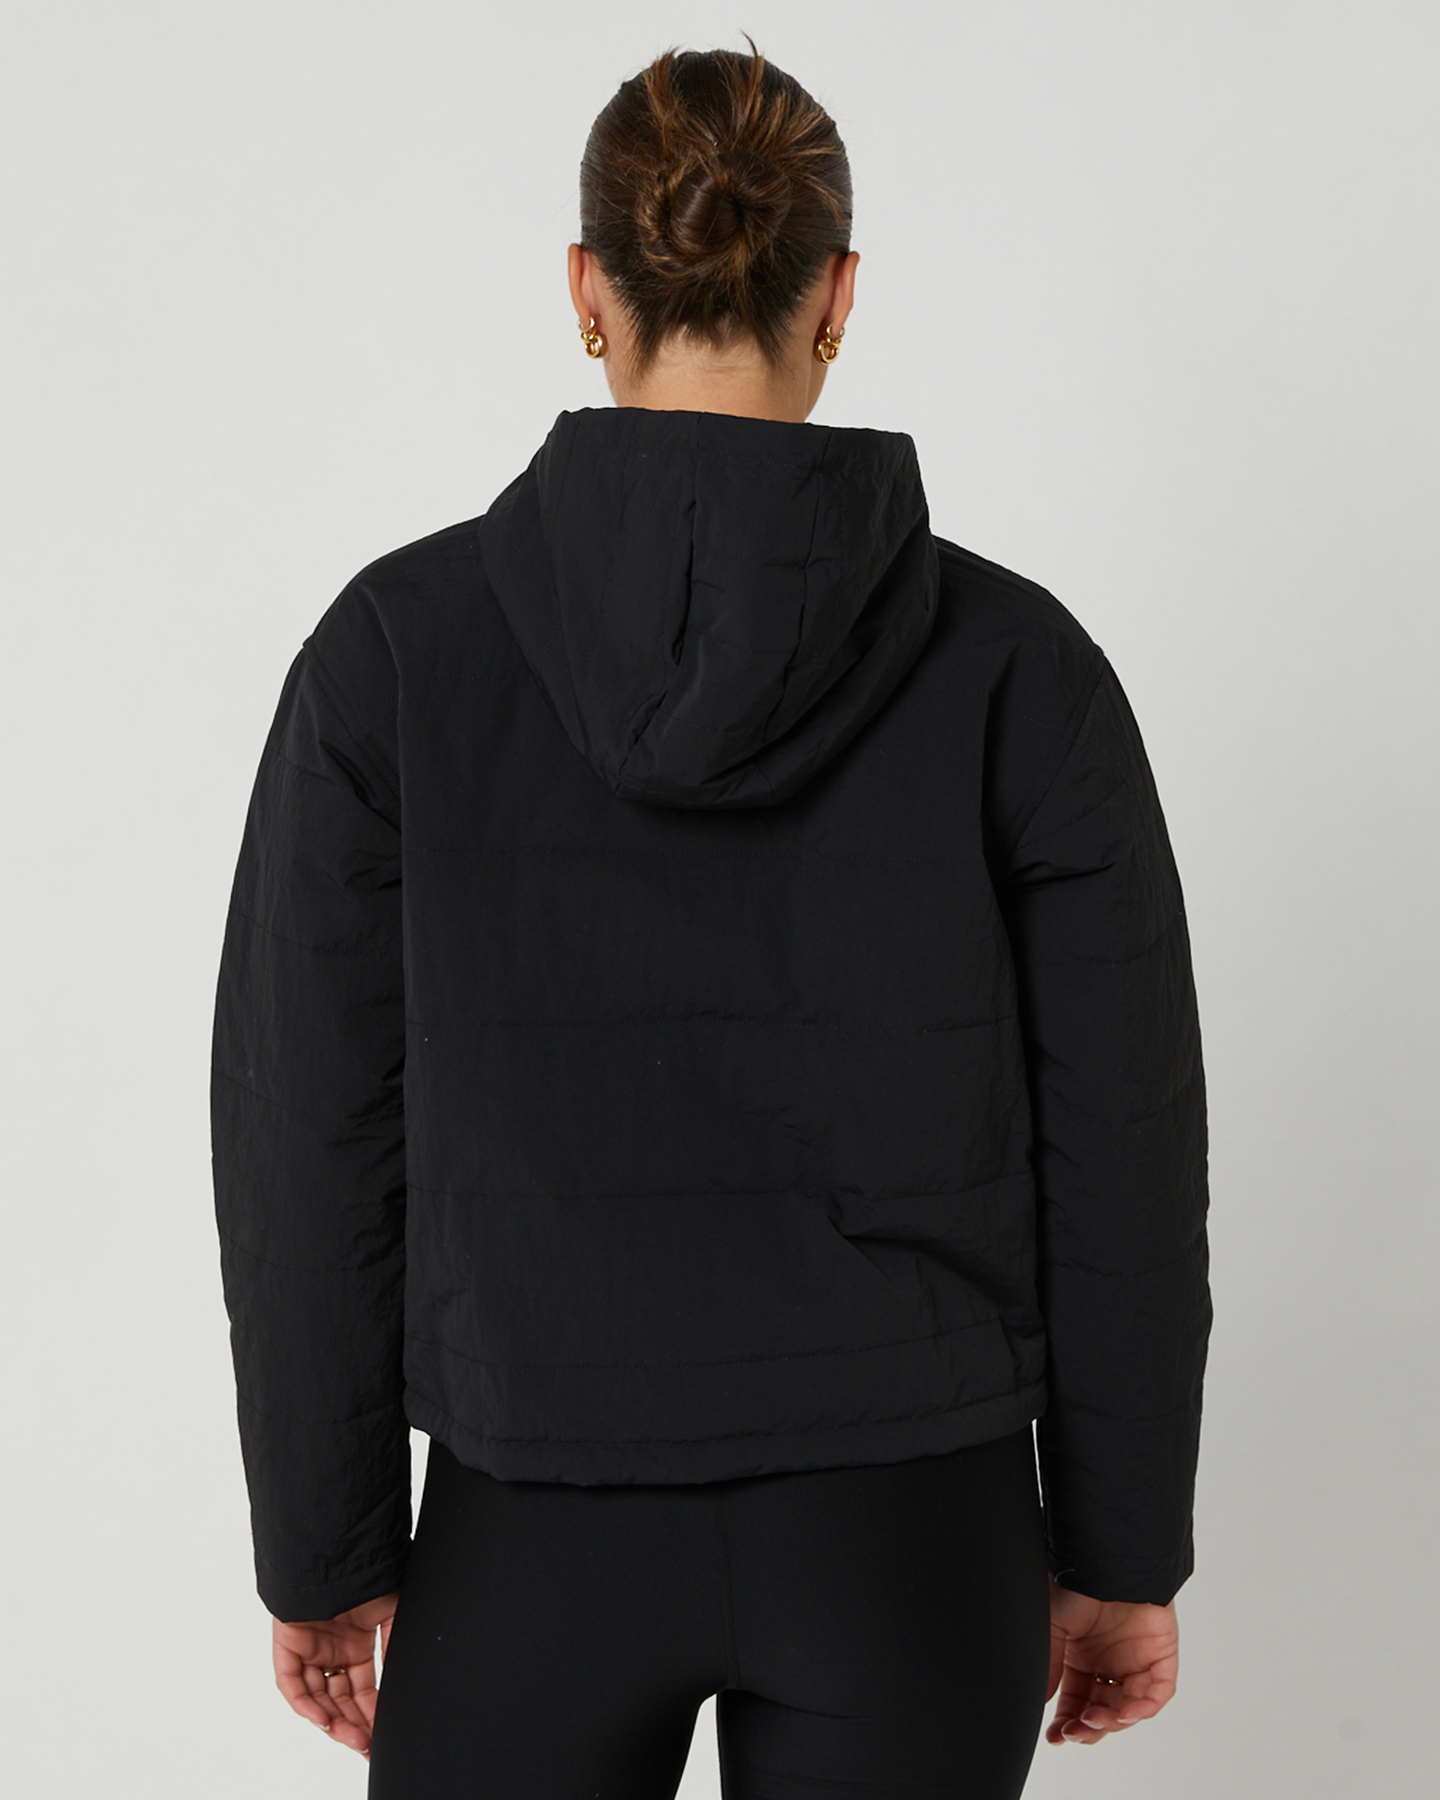 Hurley Anywhere Puffer - Black | SurfStitch